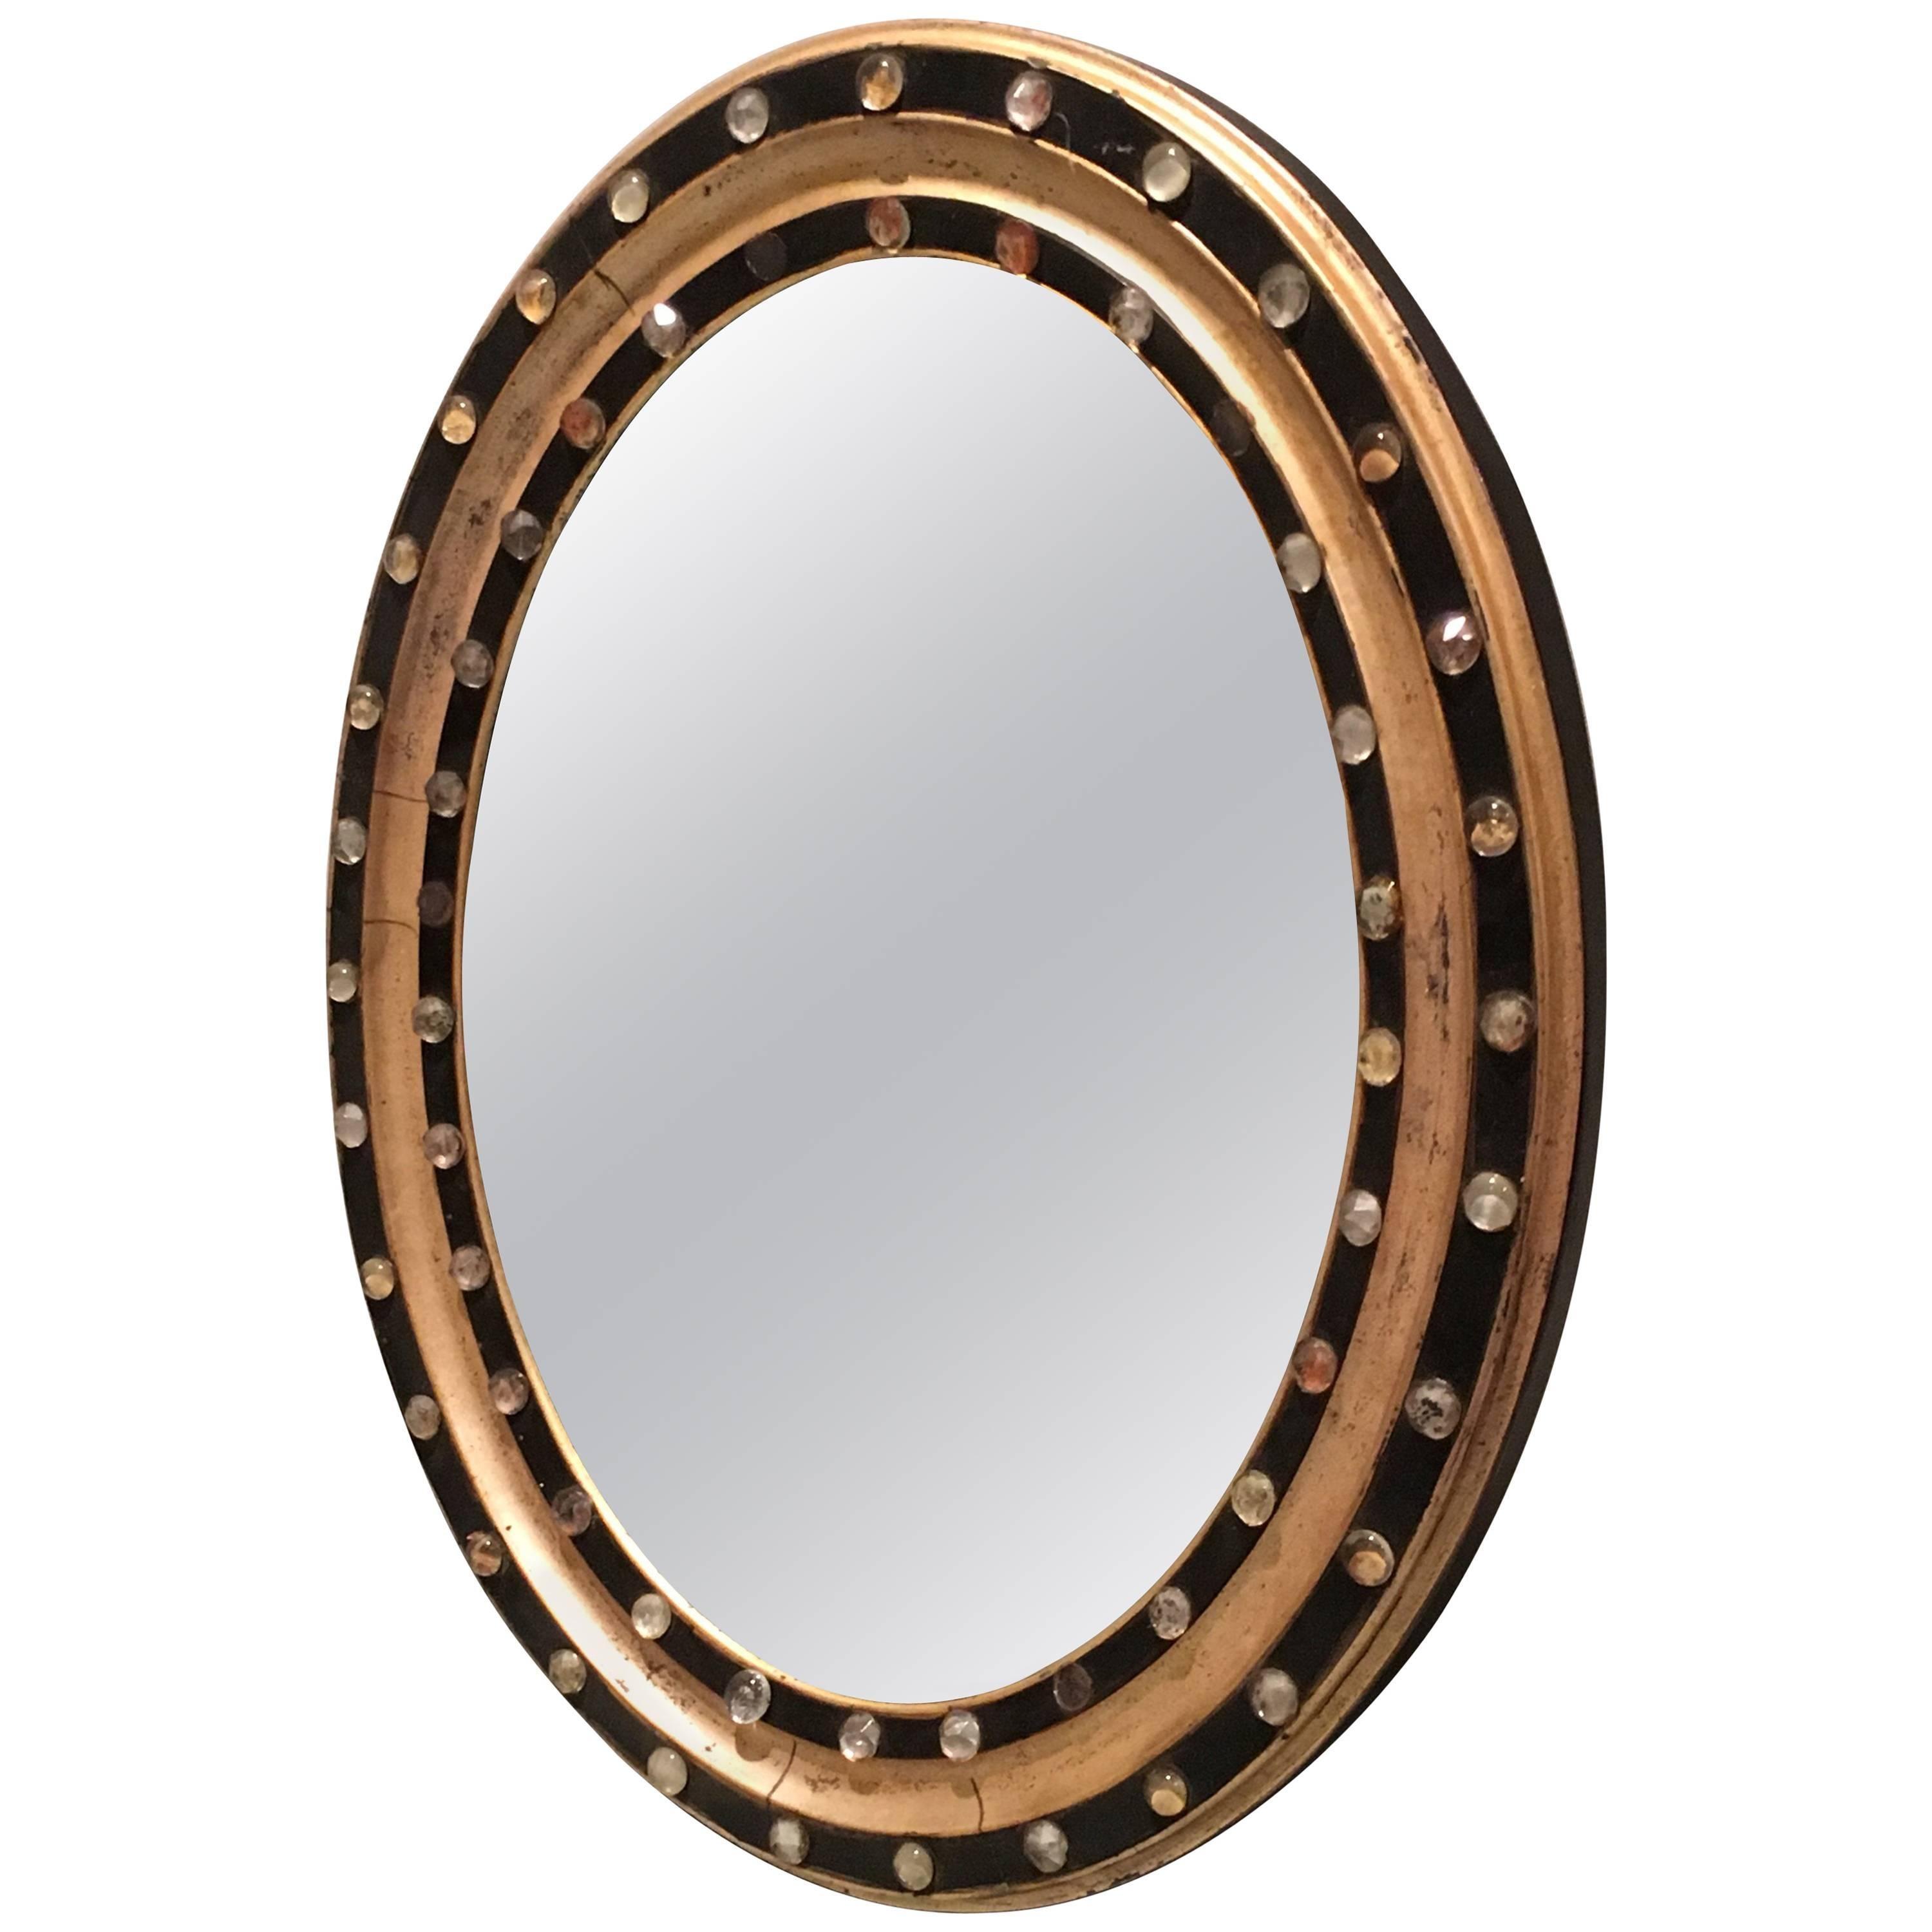 Regency Style Oval Mirror with Faceted Glass Studs, circa 1890